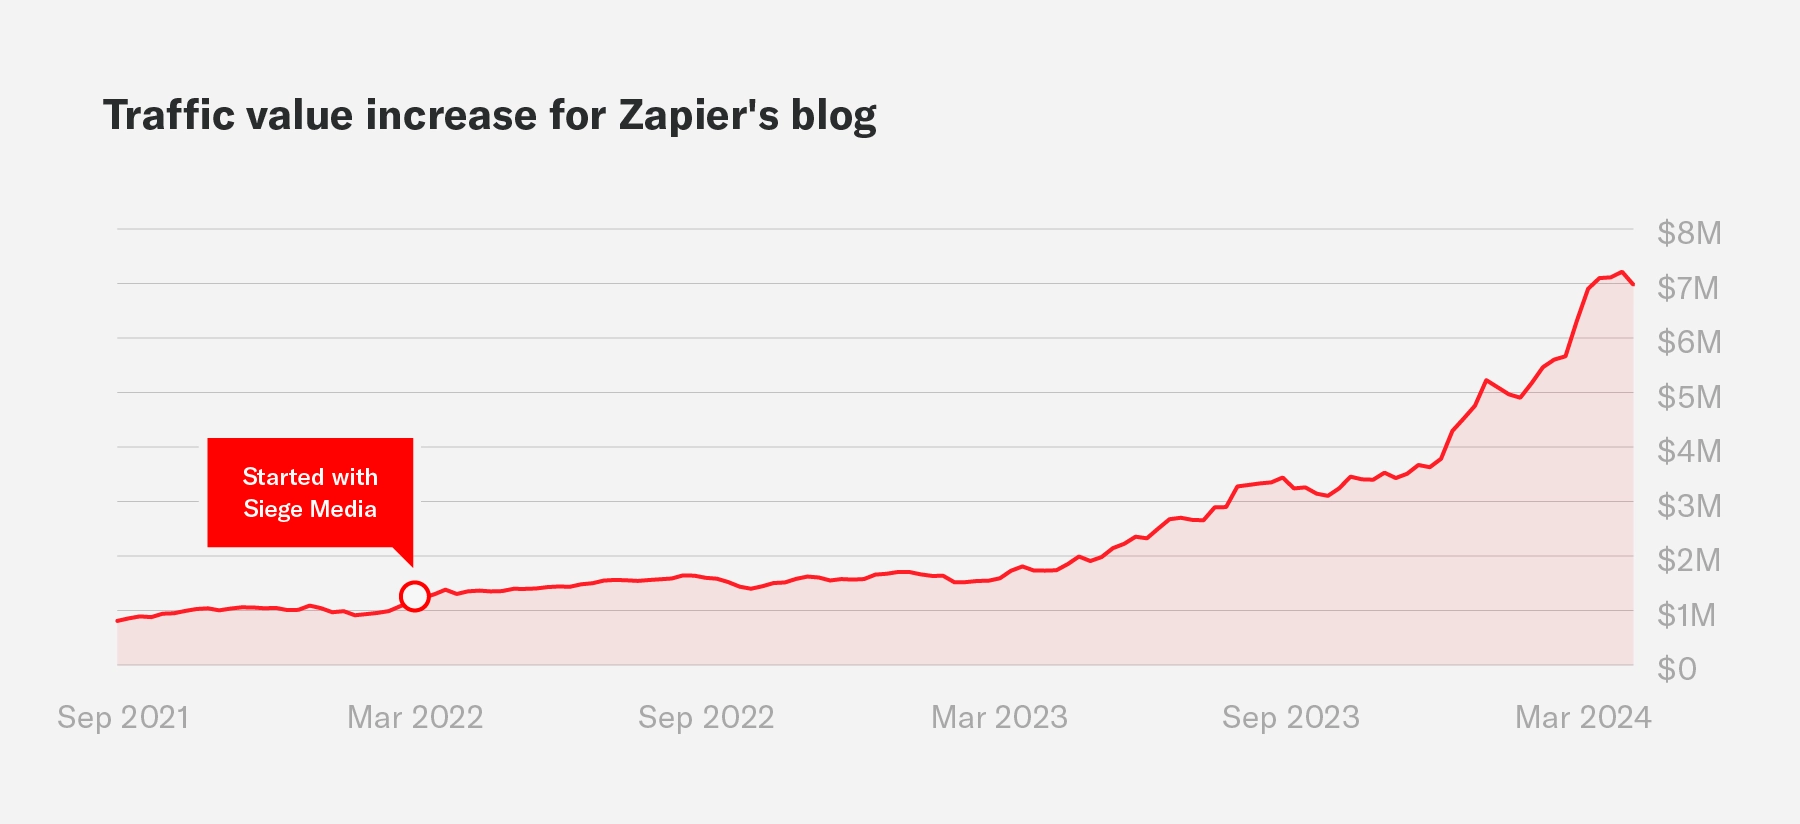 A graph showing the traffic value growth for the Zapier blog during an engagement with Siege Media.